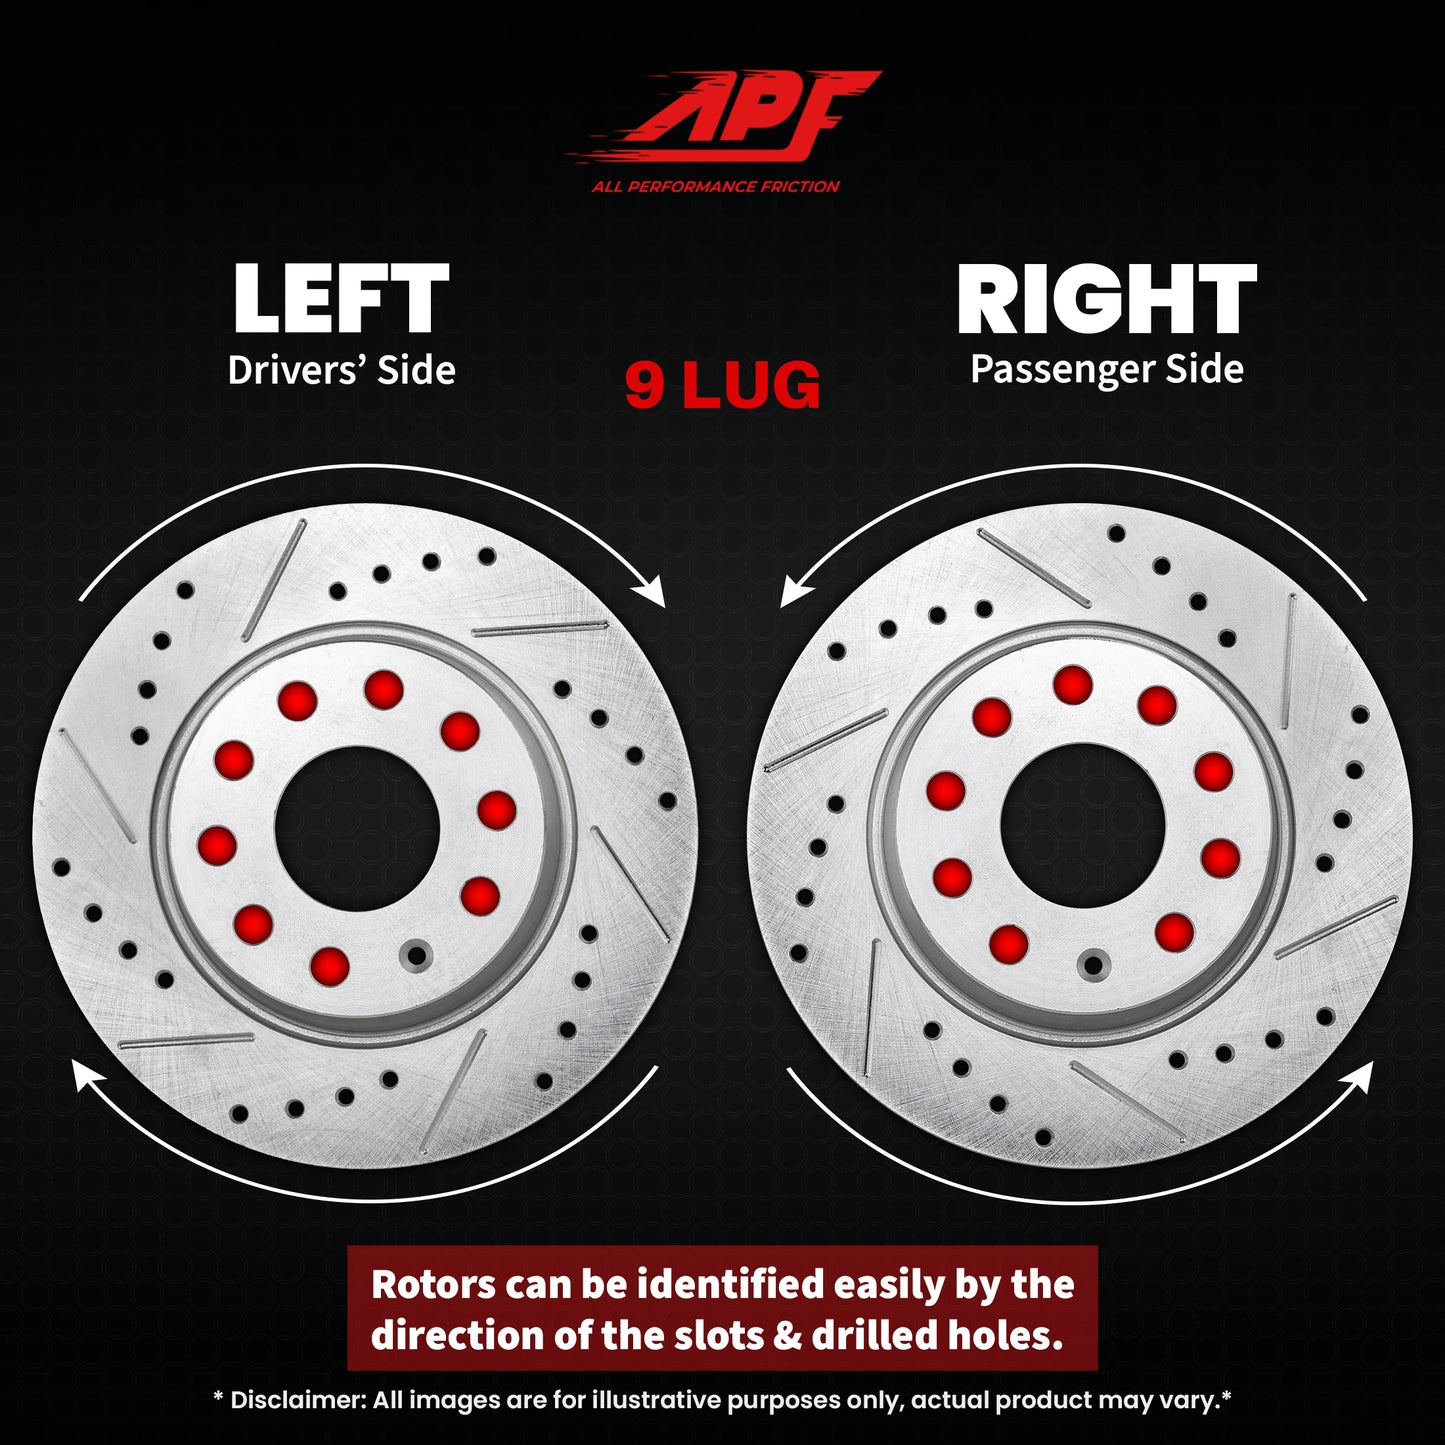 APF All Performance Friction Front and Rear Rotors and Pads Full Kit compatible with Audi A3 Quattro 2006-2009 Zinc Drilled Slotted Rotors with Ceramic Carbon Fiber Brake Pads | $474.97